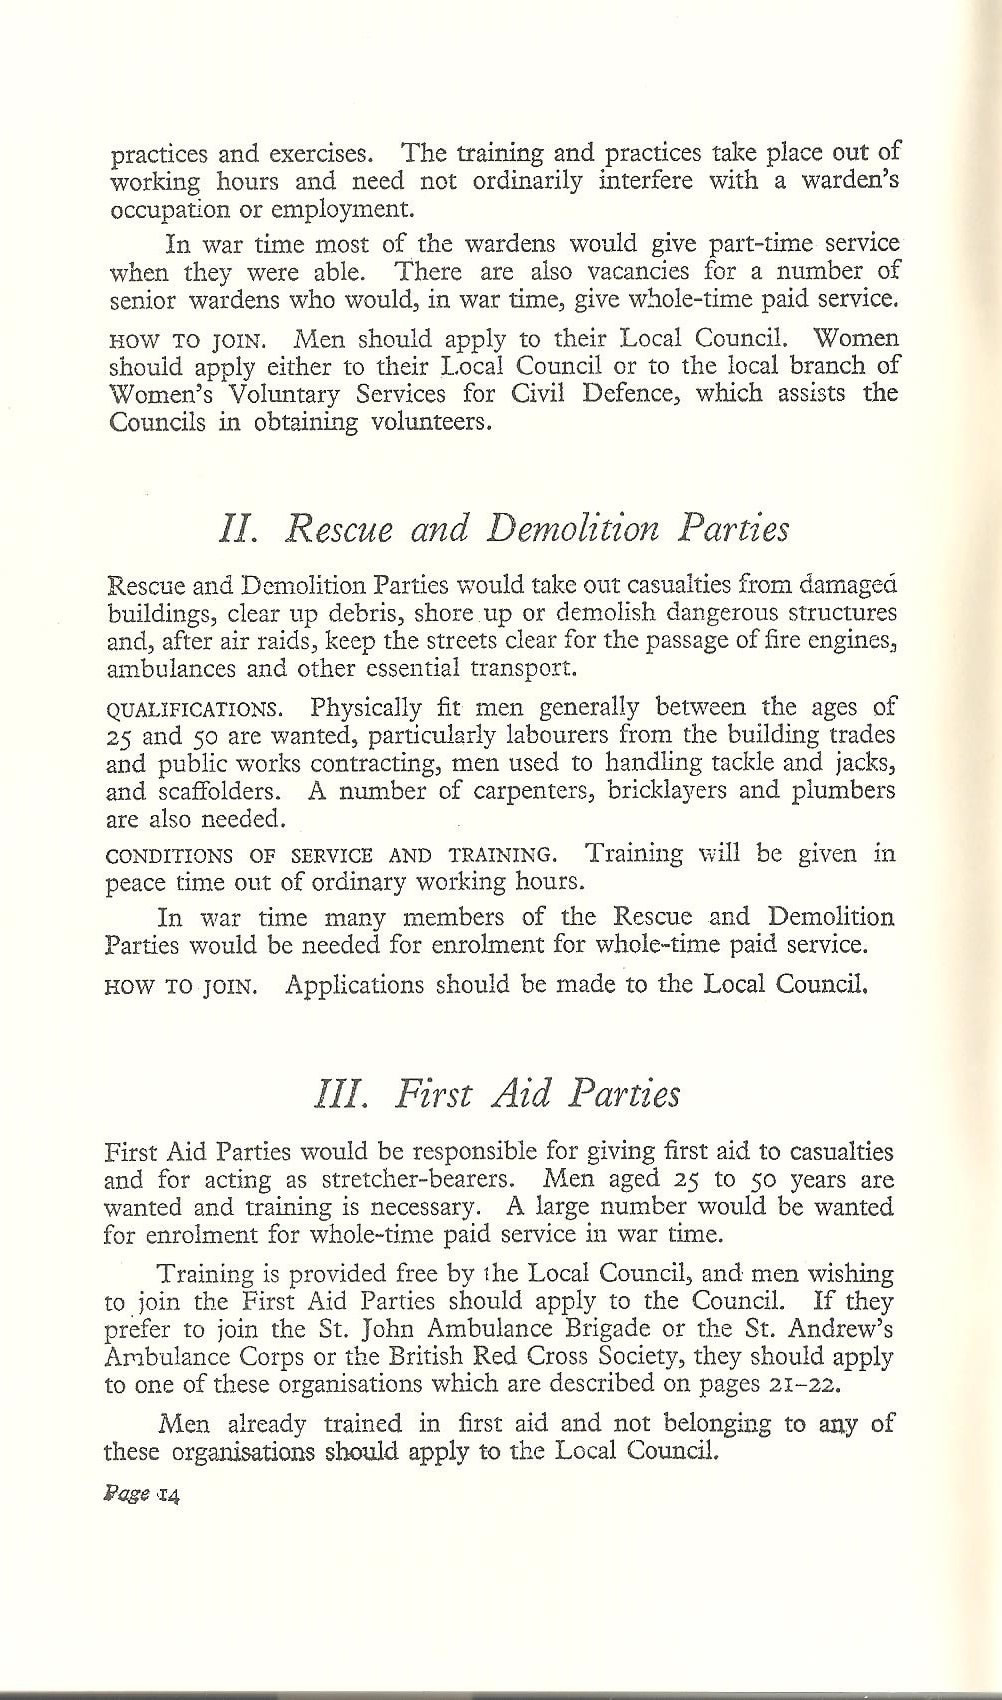 National Service Guide 1939 Air Raid Precautions - Rescue & Demolitions and First Aid Parties